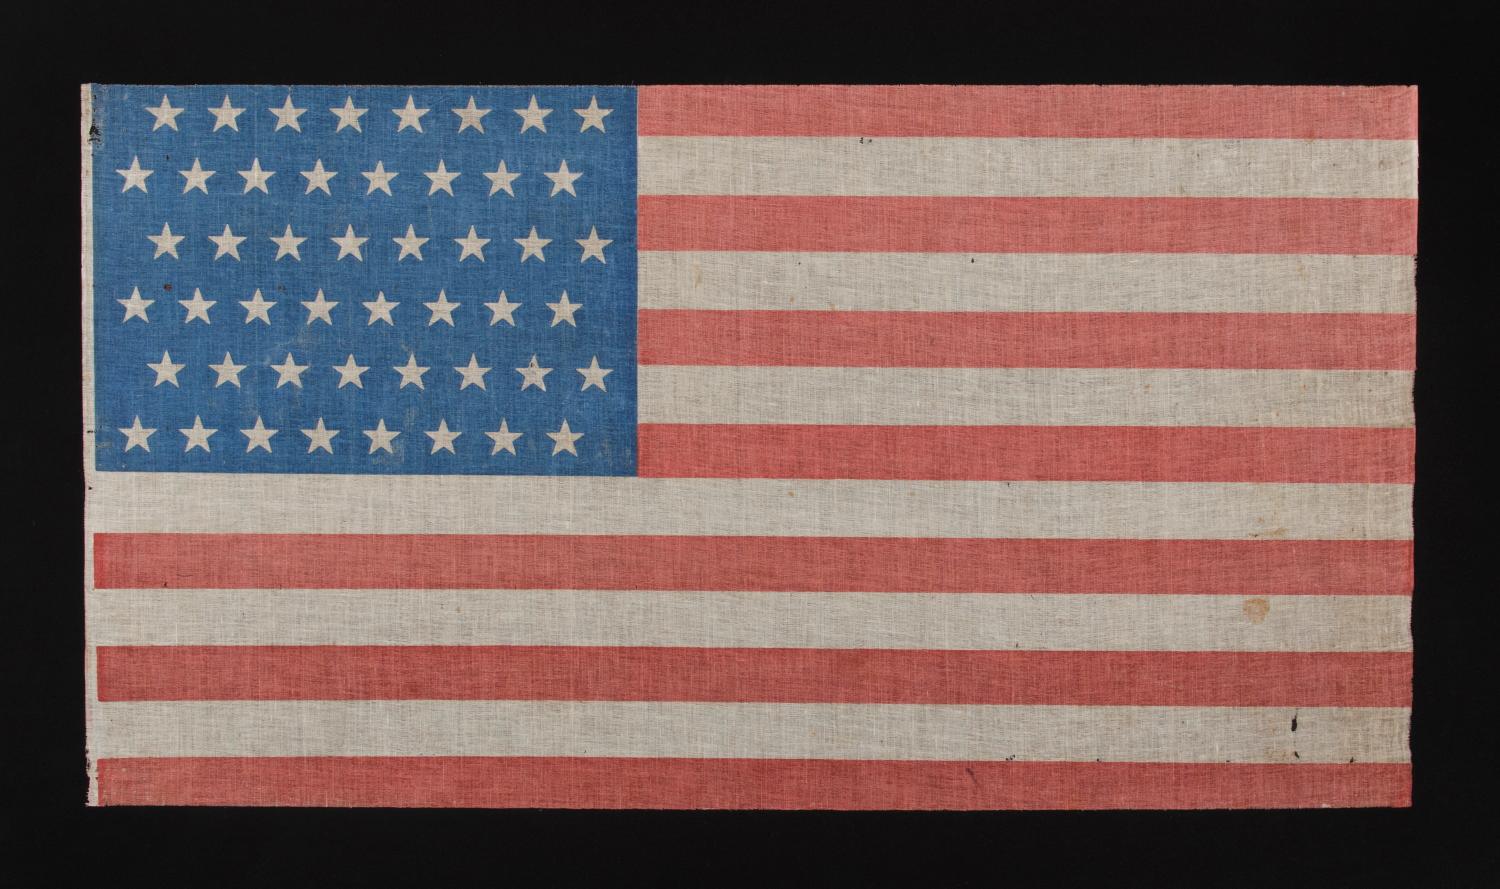 48 STARS IN STAGGERED ROWS ON A PARADE FLAG WITH A BRILLIANT, CORNFLOWER BLUE CANTON, 1896-1918

48 star American national parade flag, printed on coarse cotton, with an attractive, cornflower blue canton and scarlet red stripes.

On June 24th,